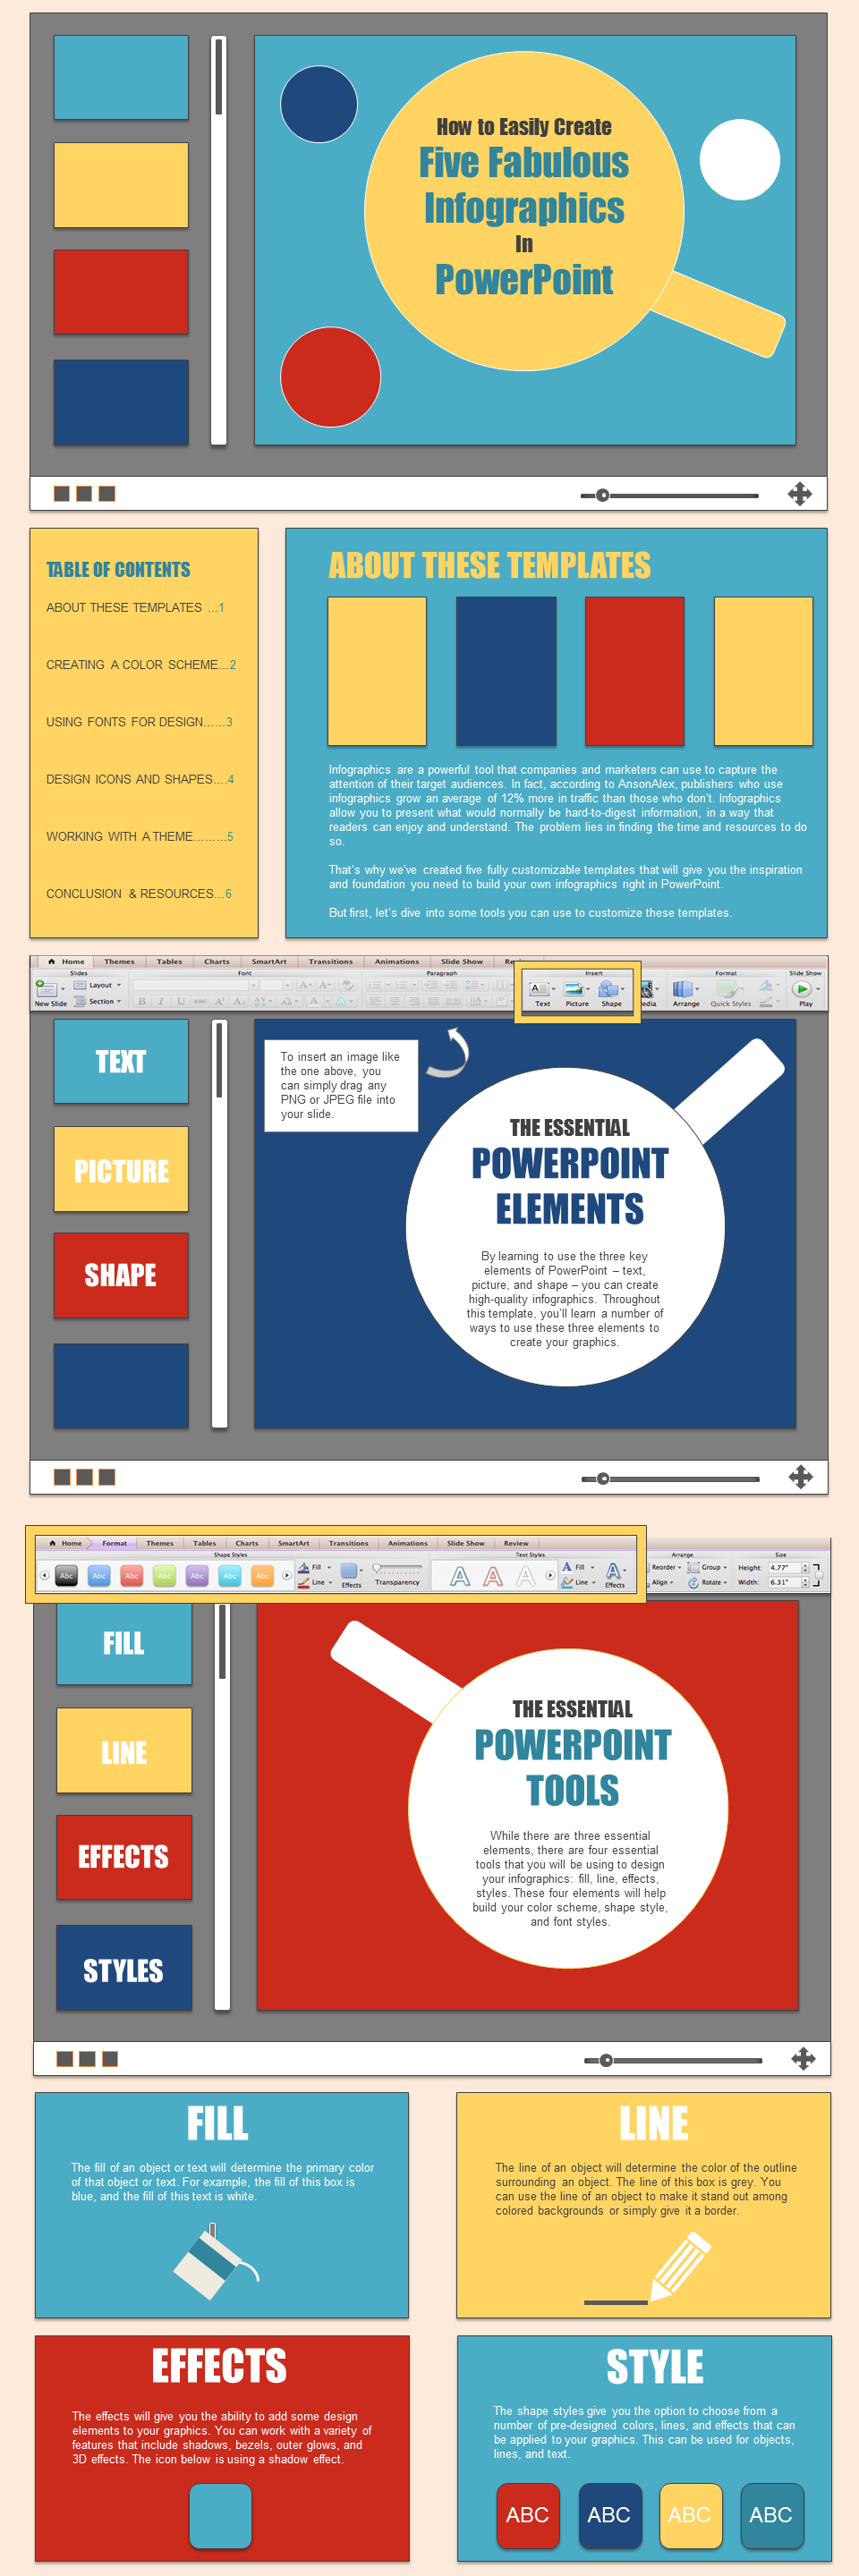 I will create professional infographic for $5 - SEOClerks